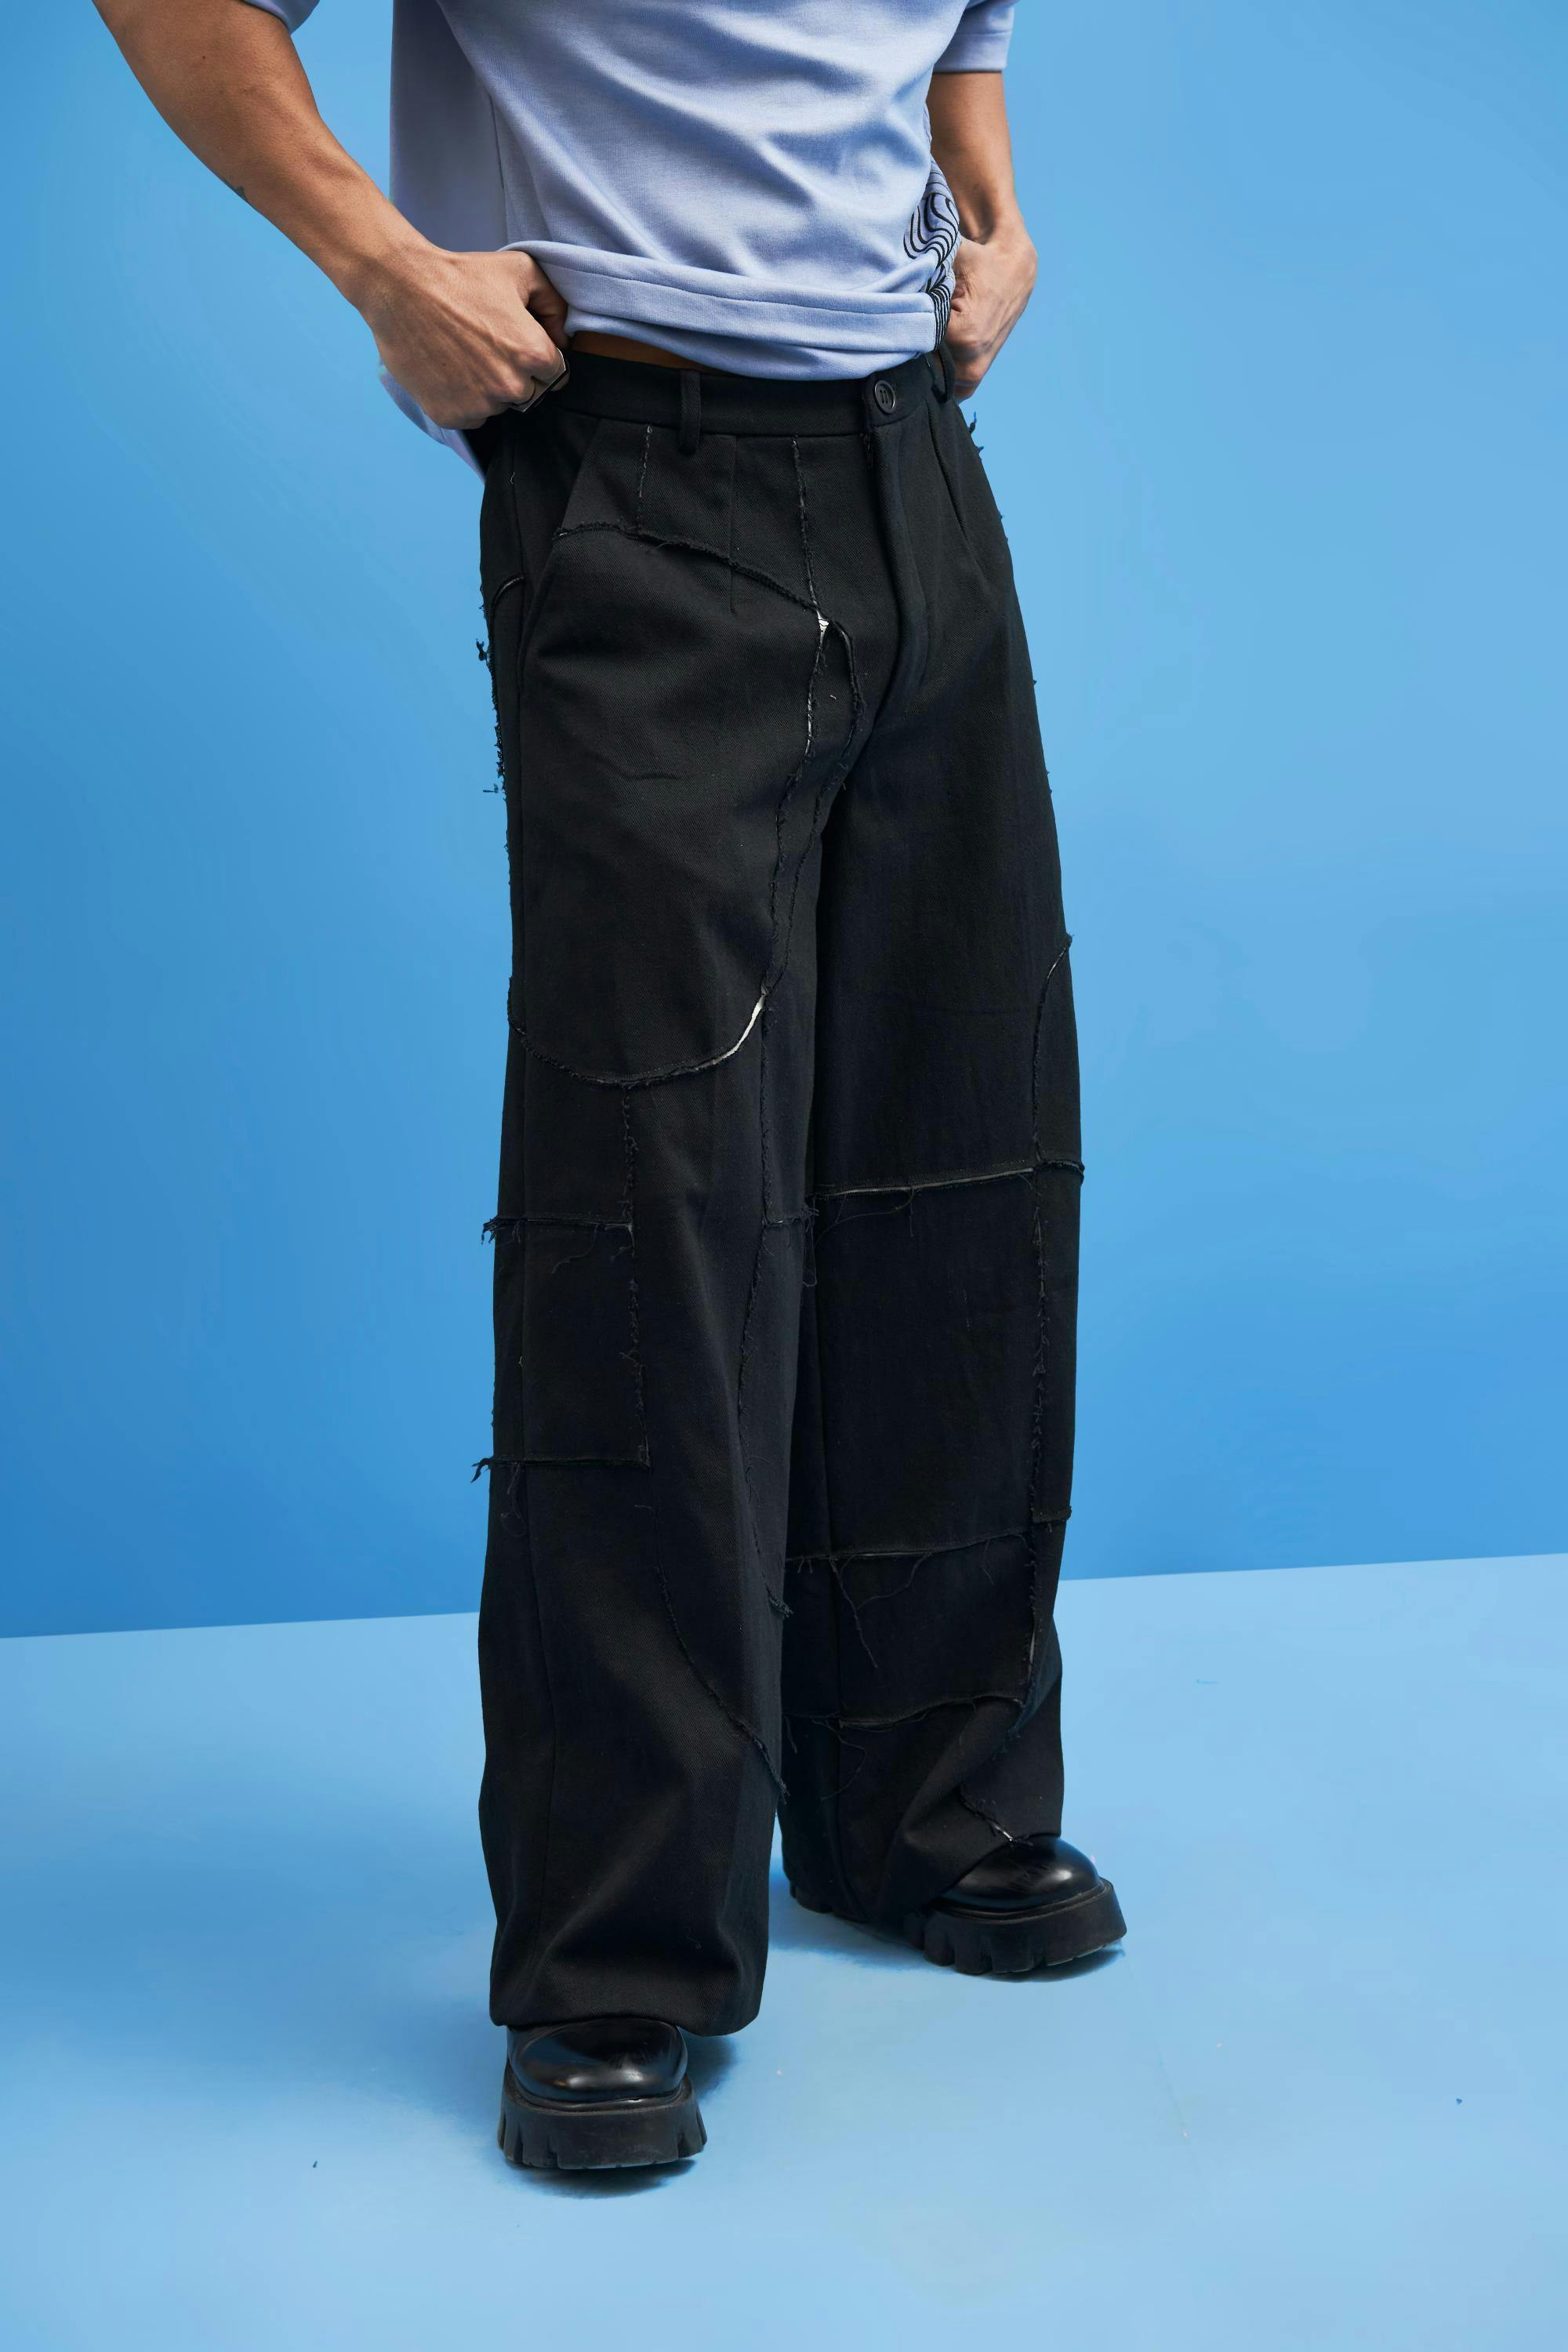 Black Shoji all-over Patchwork Trousers, a product by Siddhant Agrawal Label